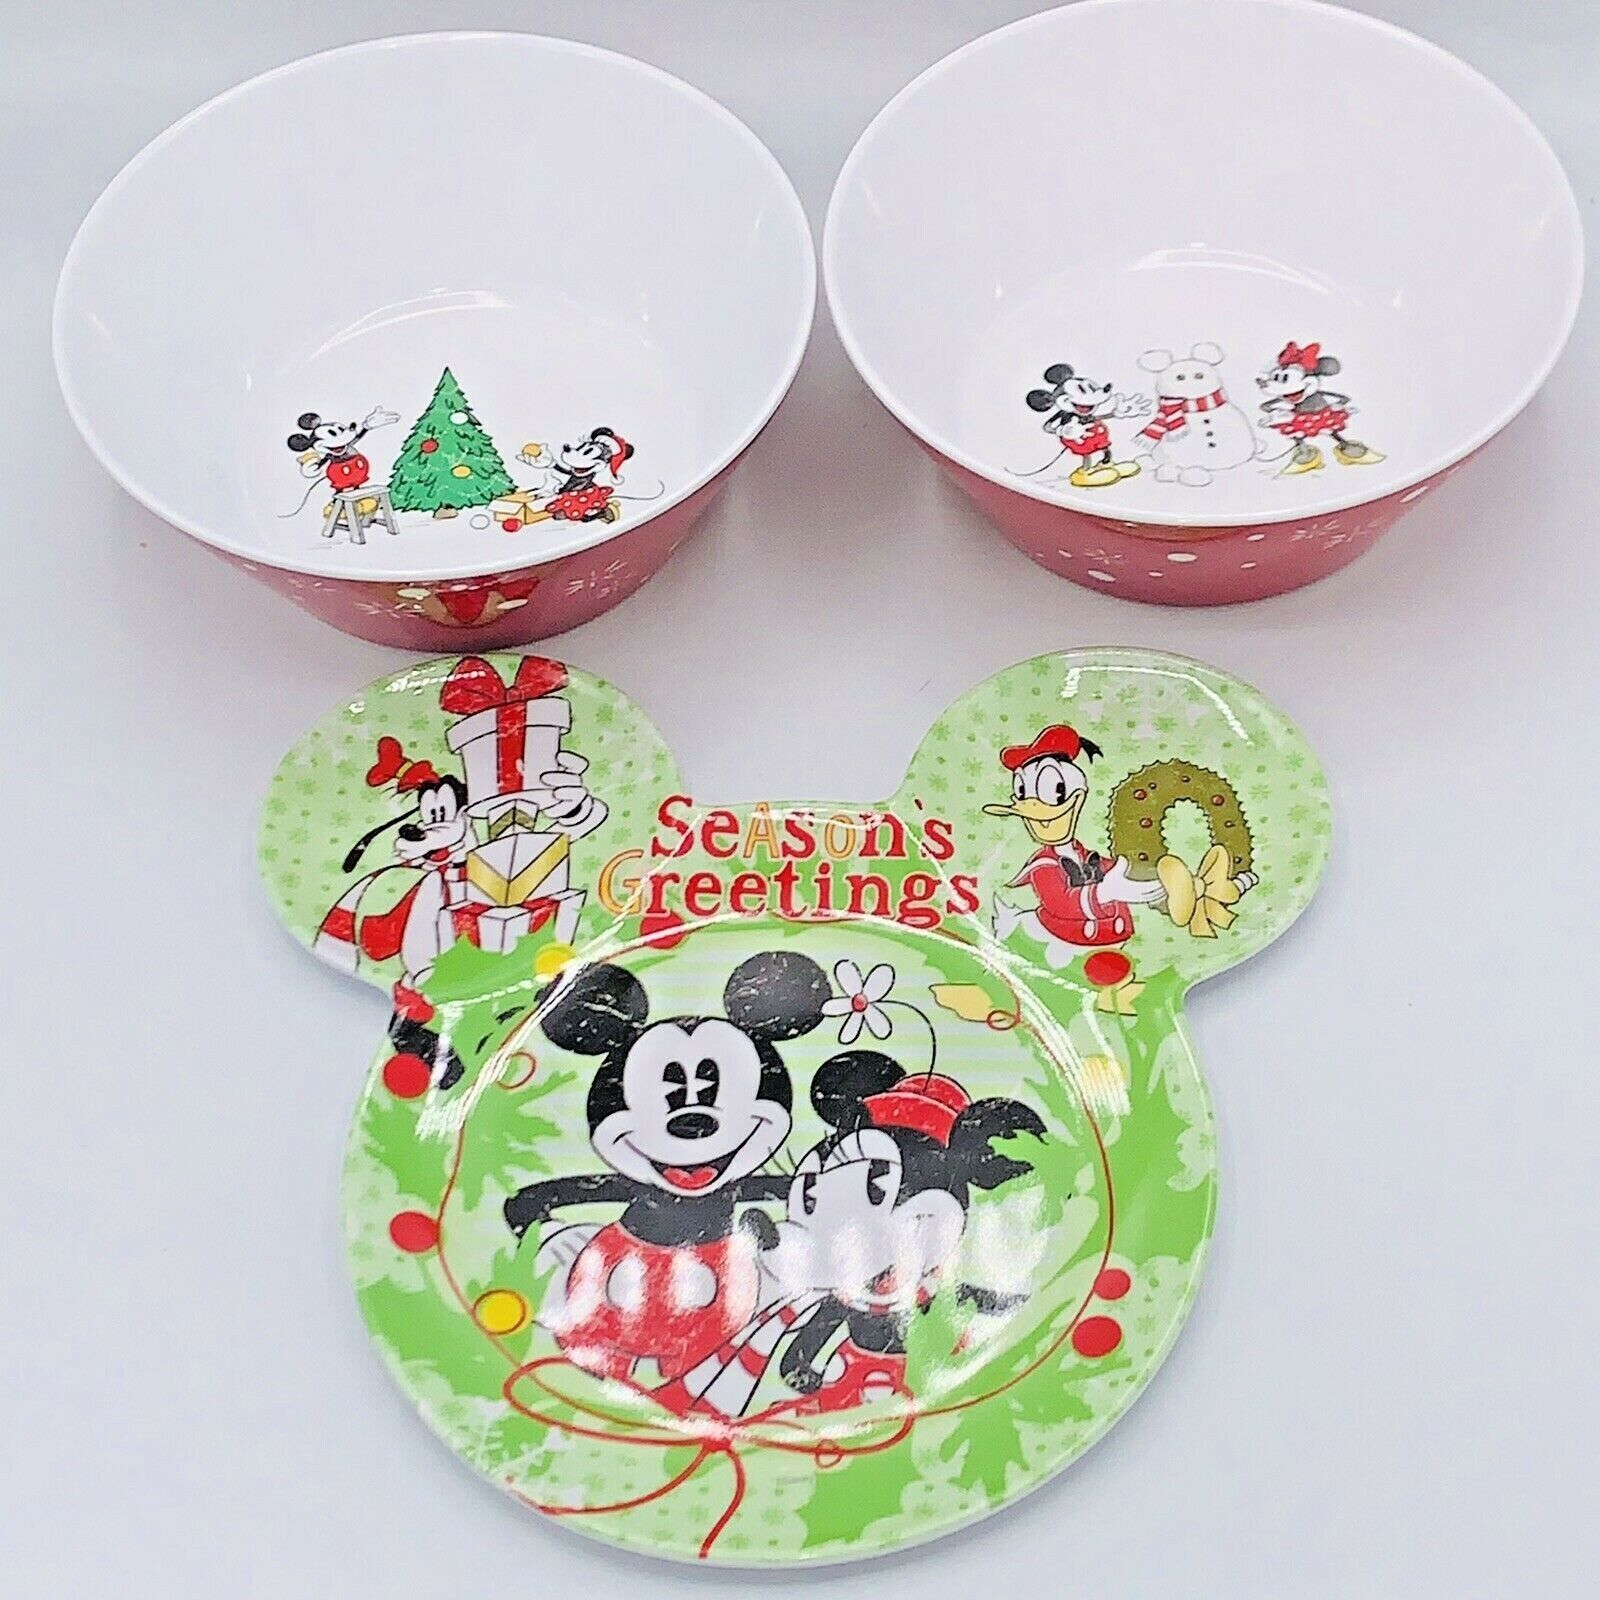 Pottery Barn Max 85% OFF SET 2 Translated Mickey Mouse Small Minnie And Chr Plate Bowls